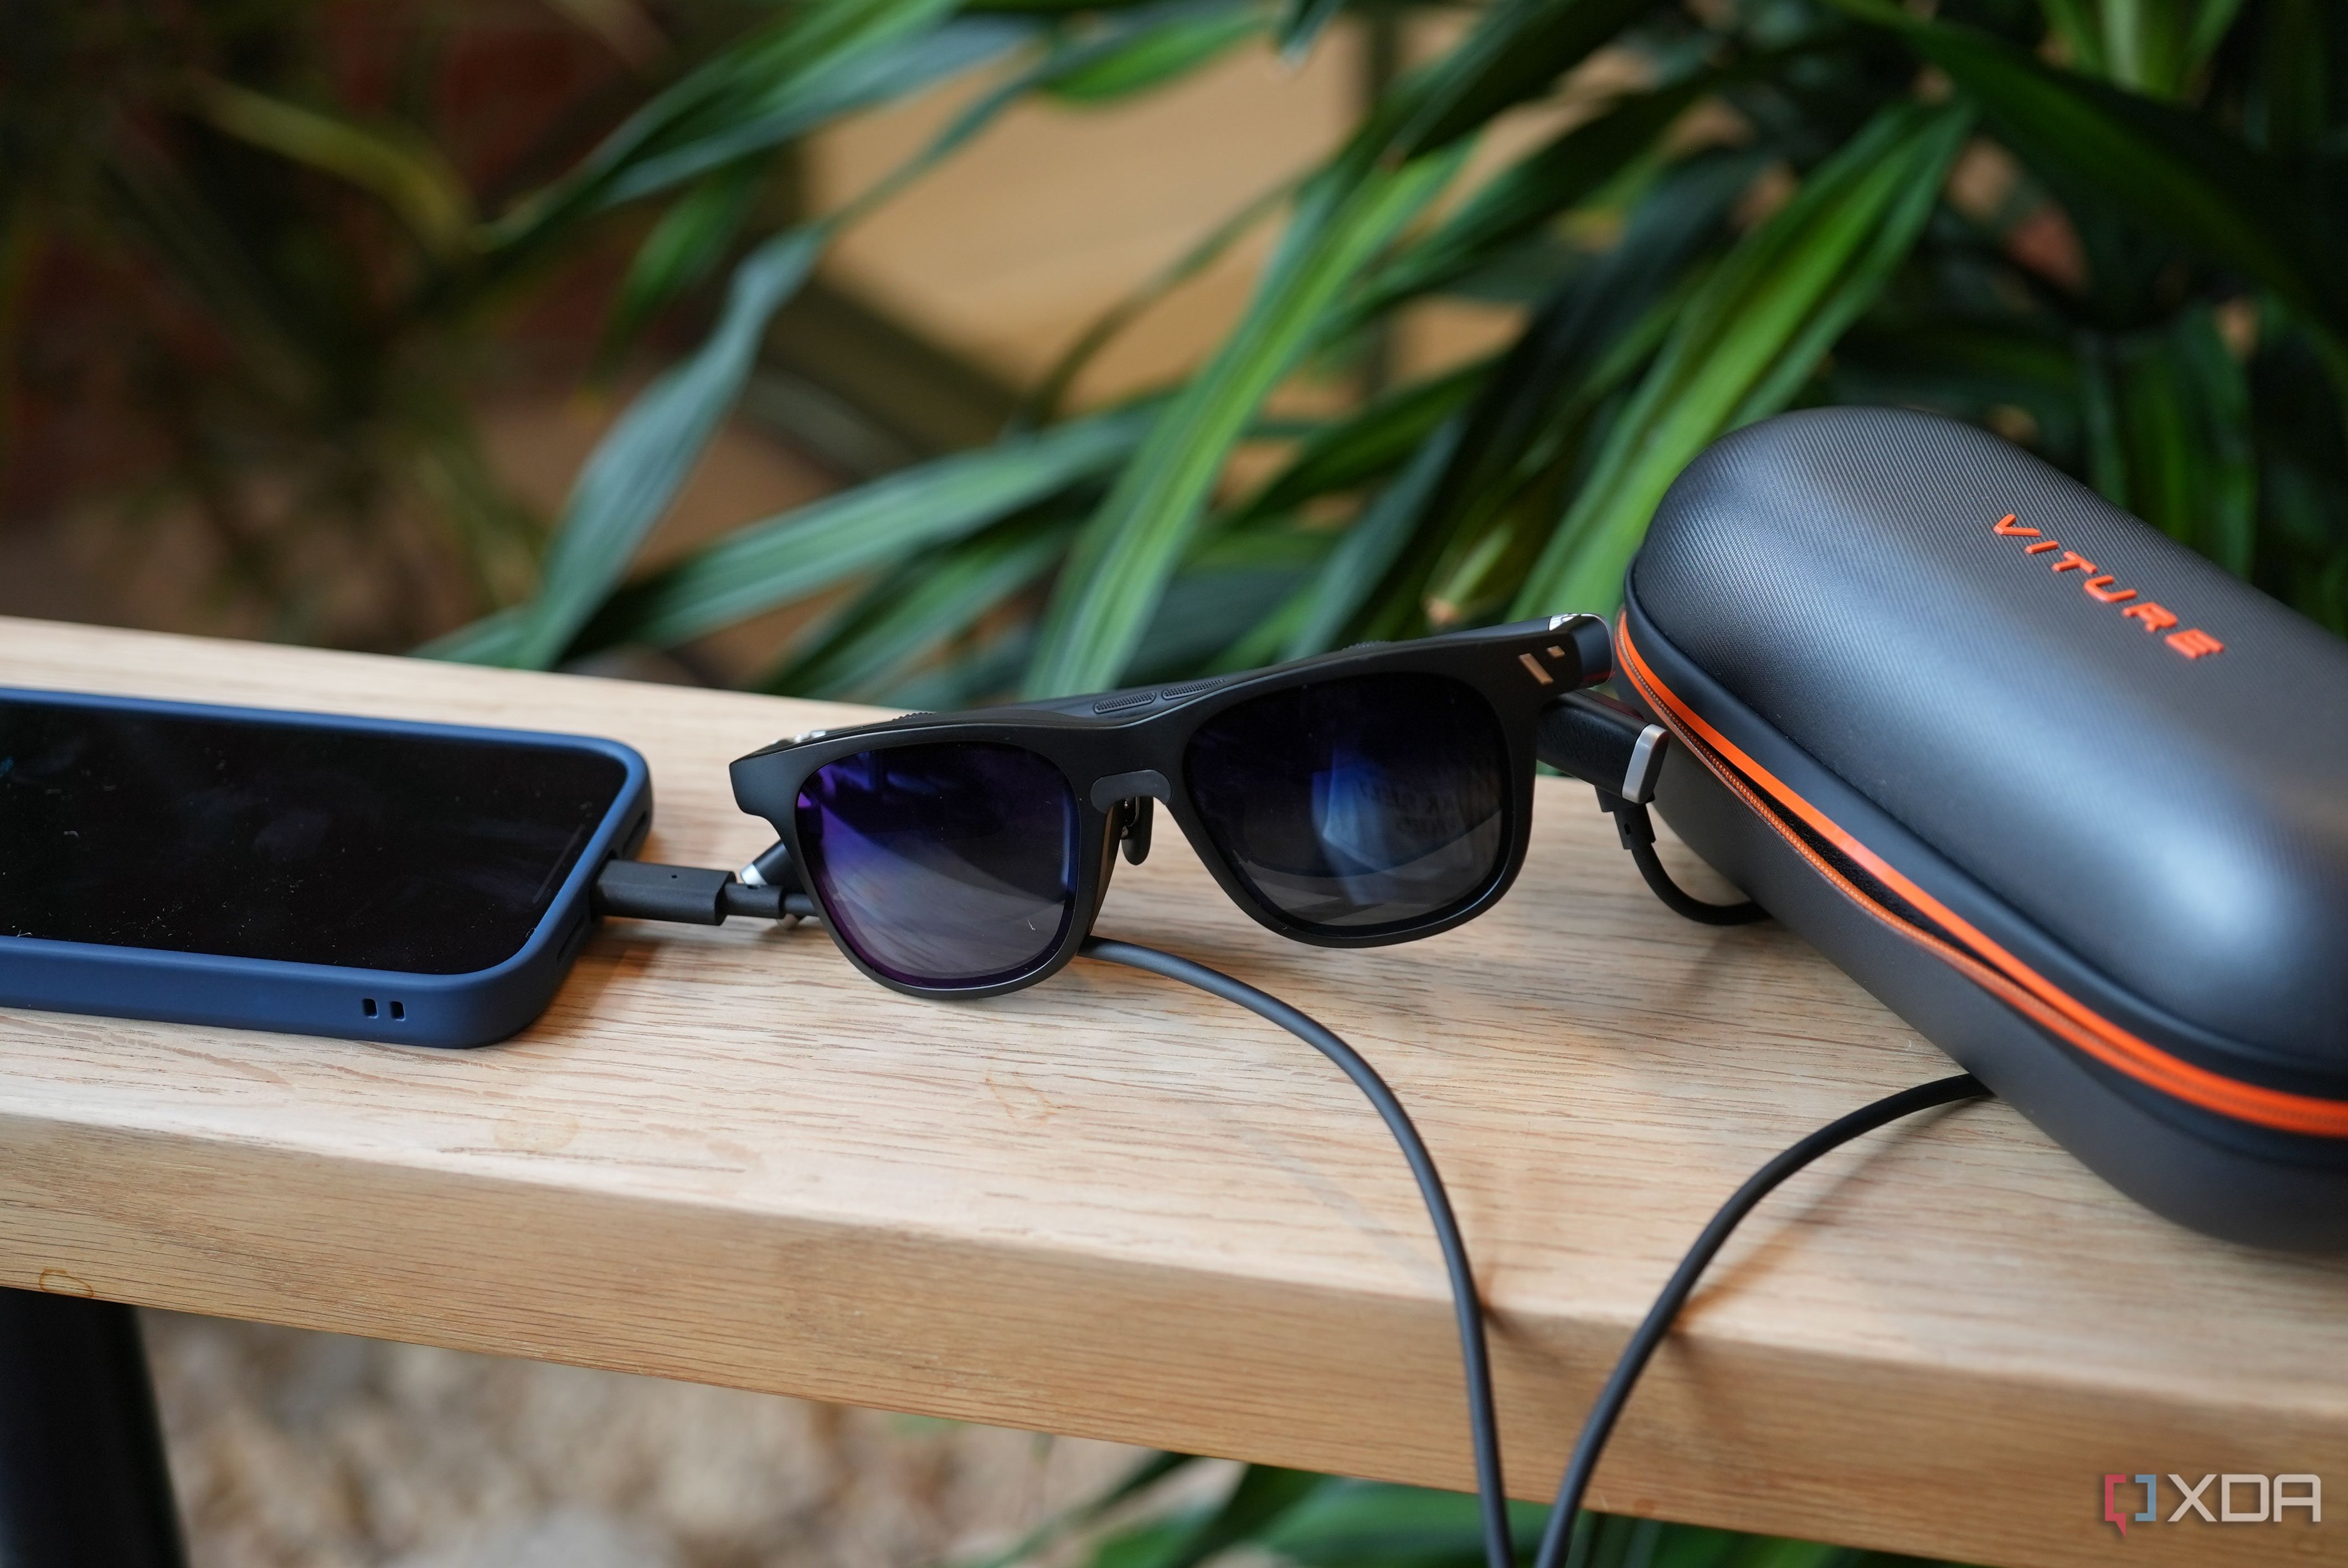 Viture One review: The most capable AR glasses so far